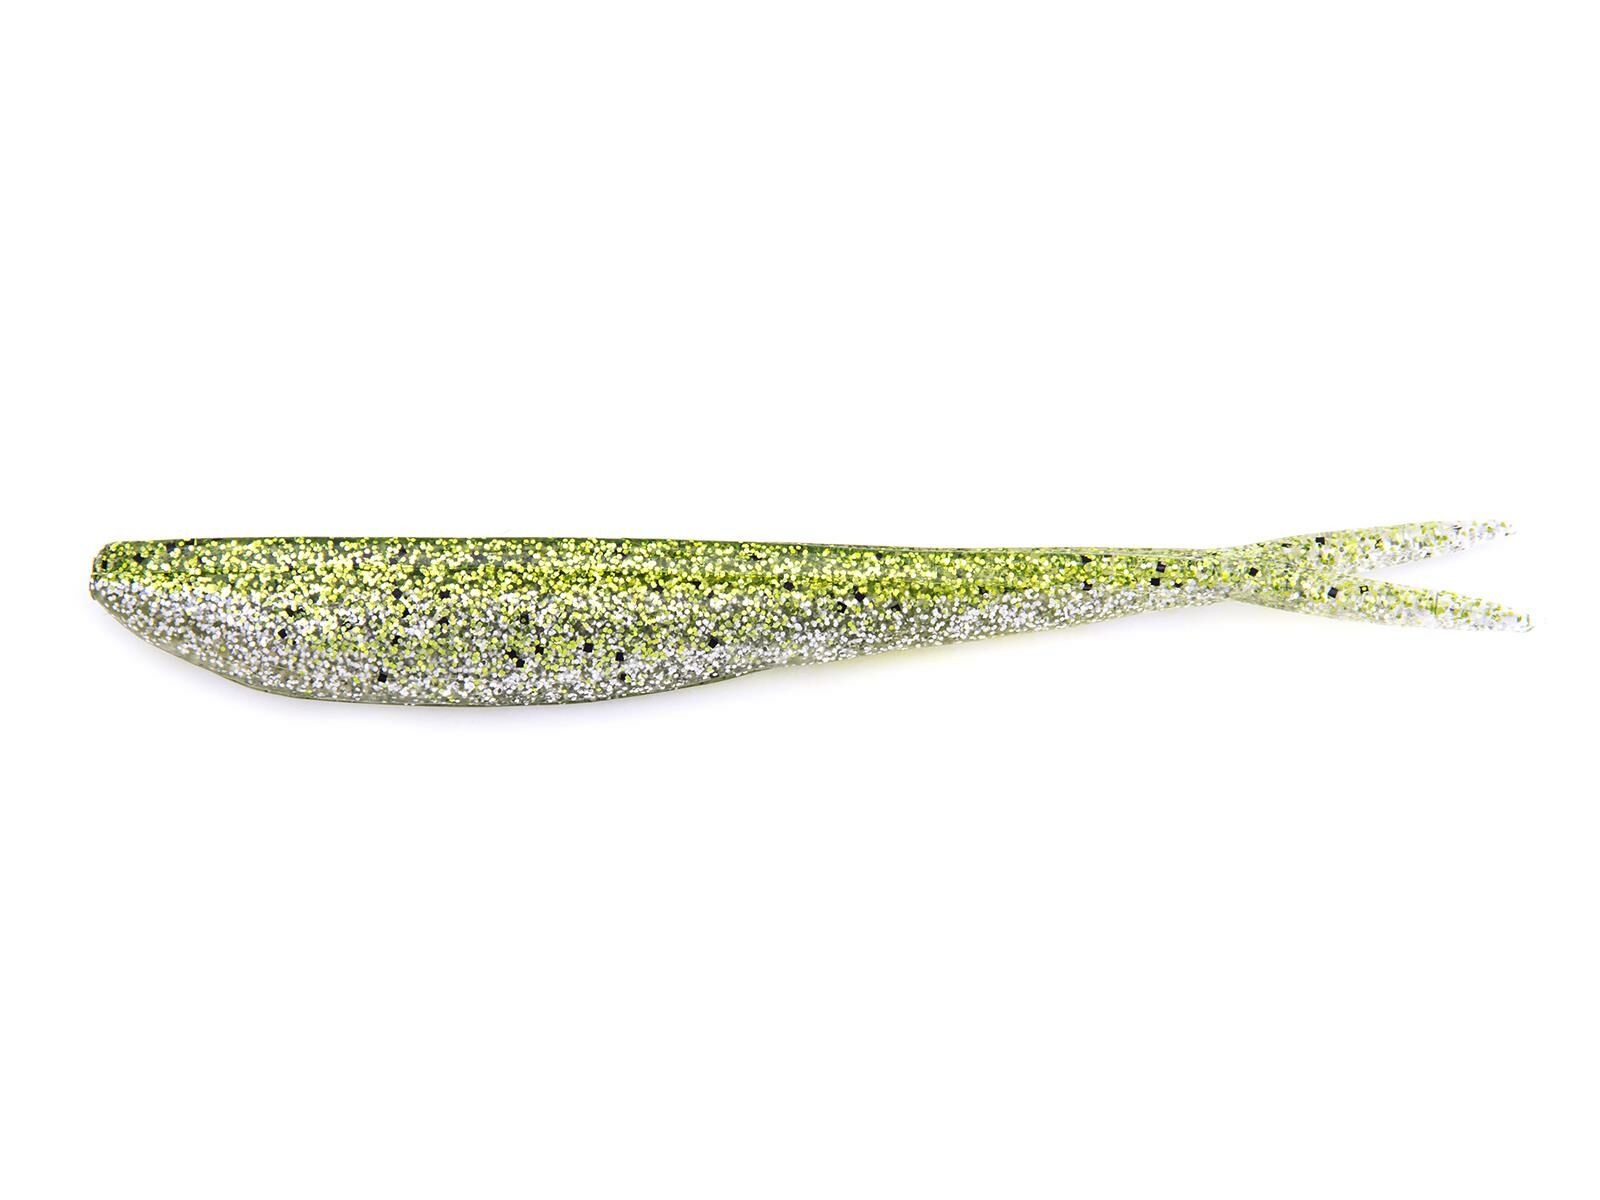 3.5" Fin-S Fish - Chartreuse Ice